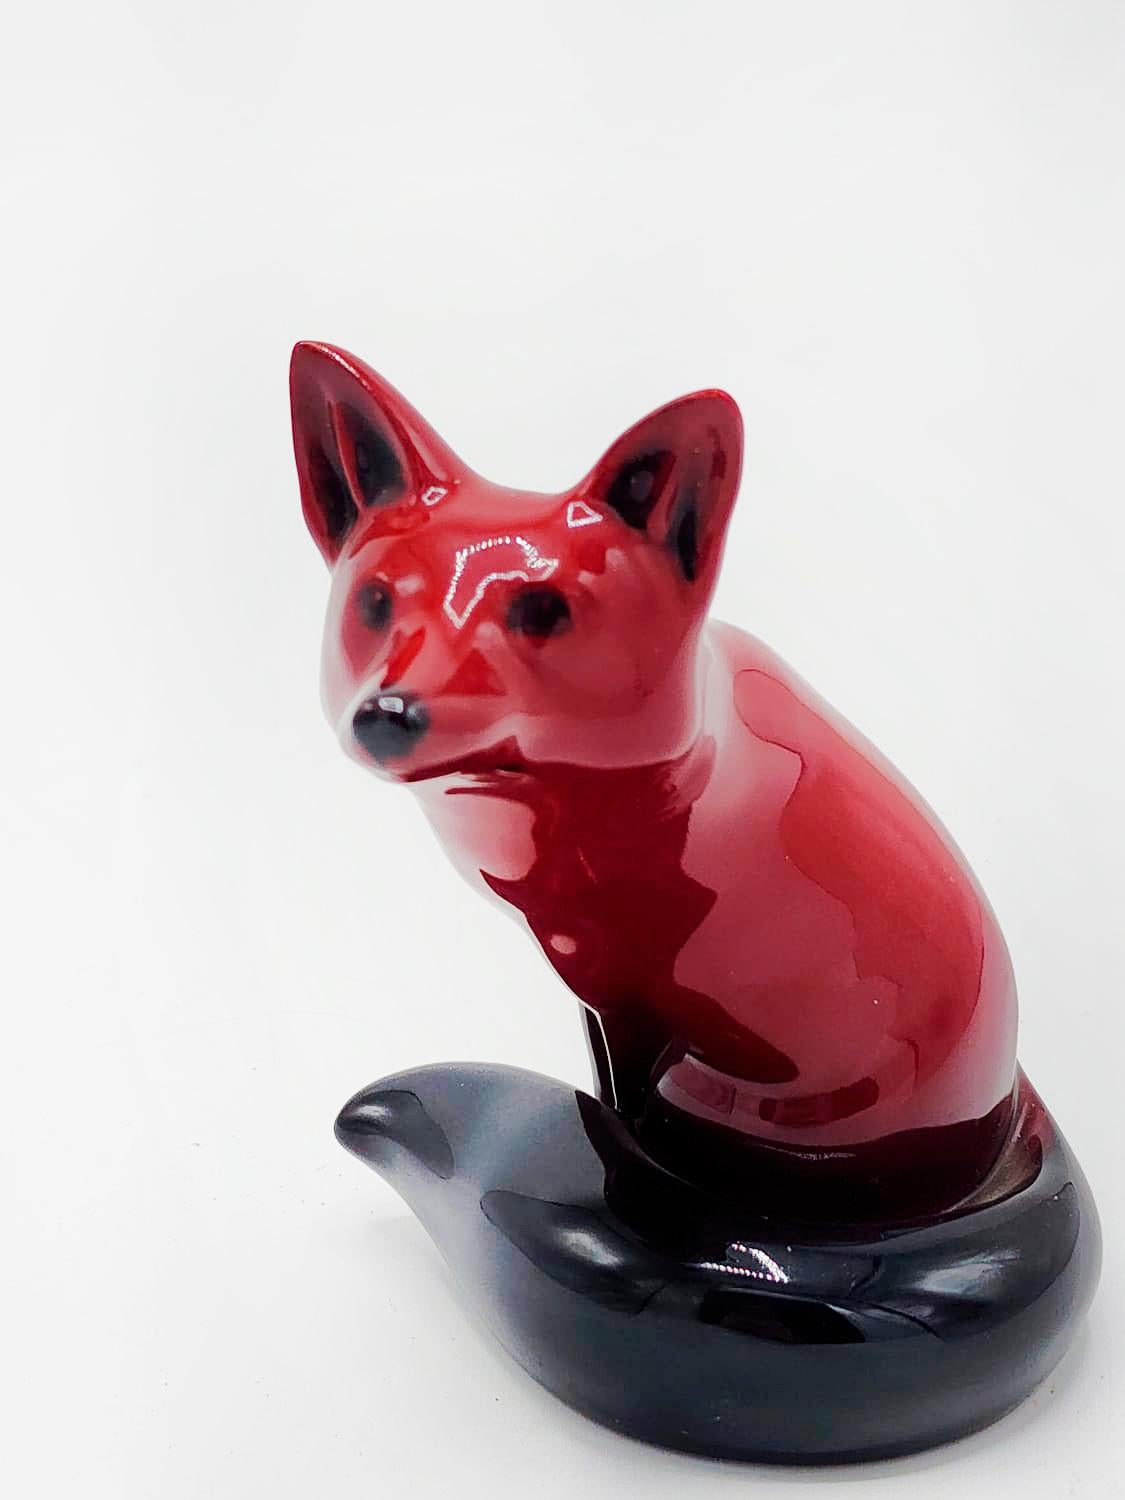 This adorable Figurine is made out of bone china / porcelain. This lovely little piece was issued by Royal Doulton in 1913-1962 and is a part of the flambe style collection, which uses a copper oxide glaze for the deep red finish. The sculpture is a